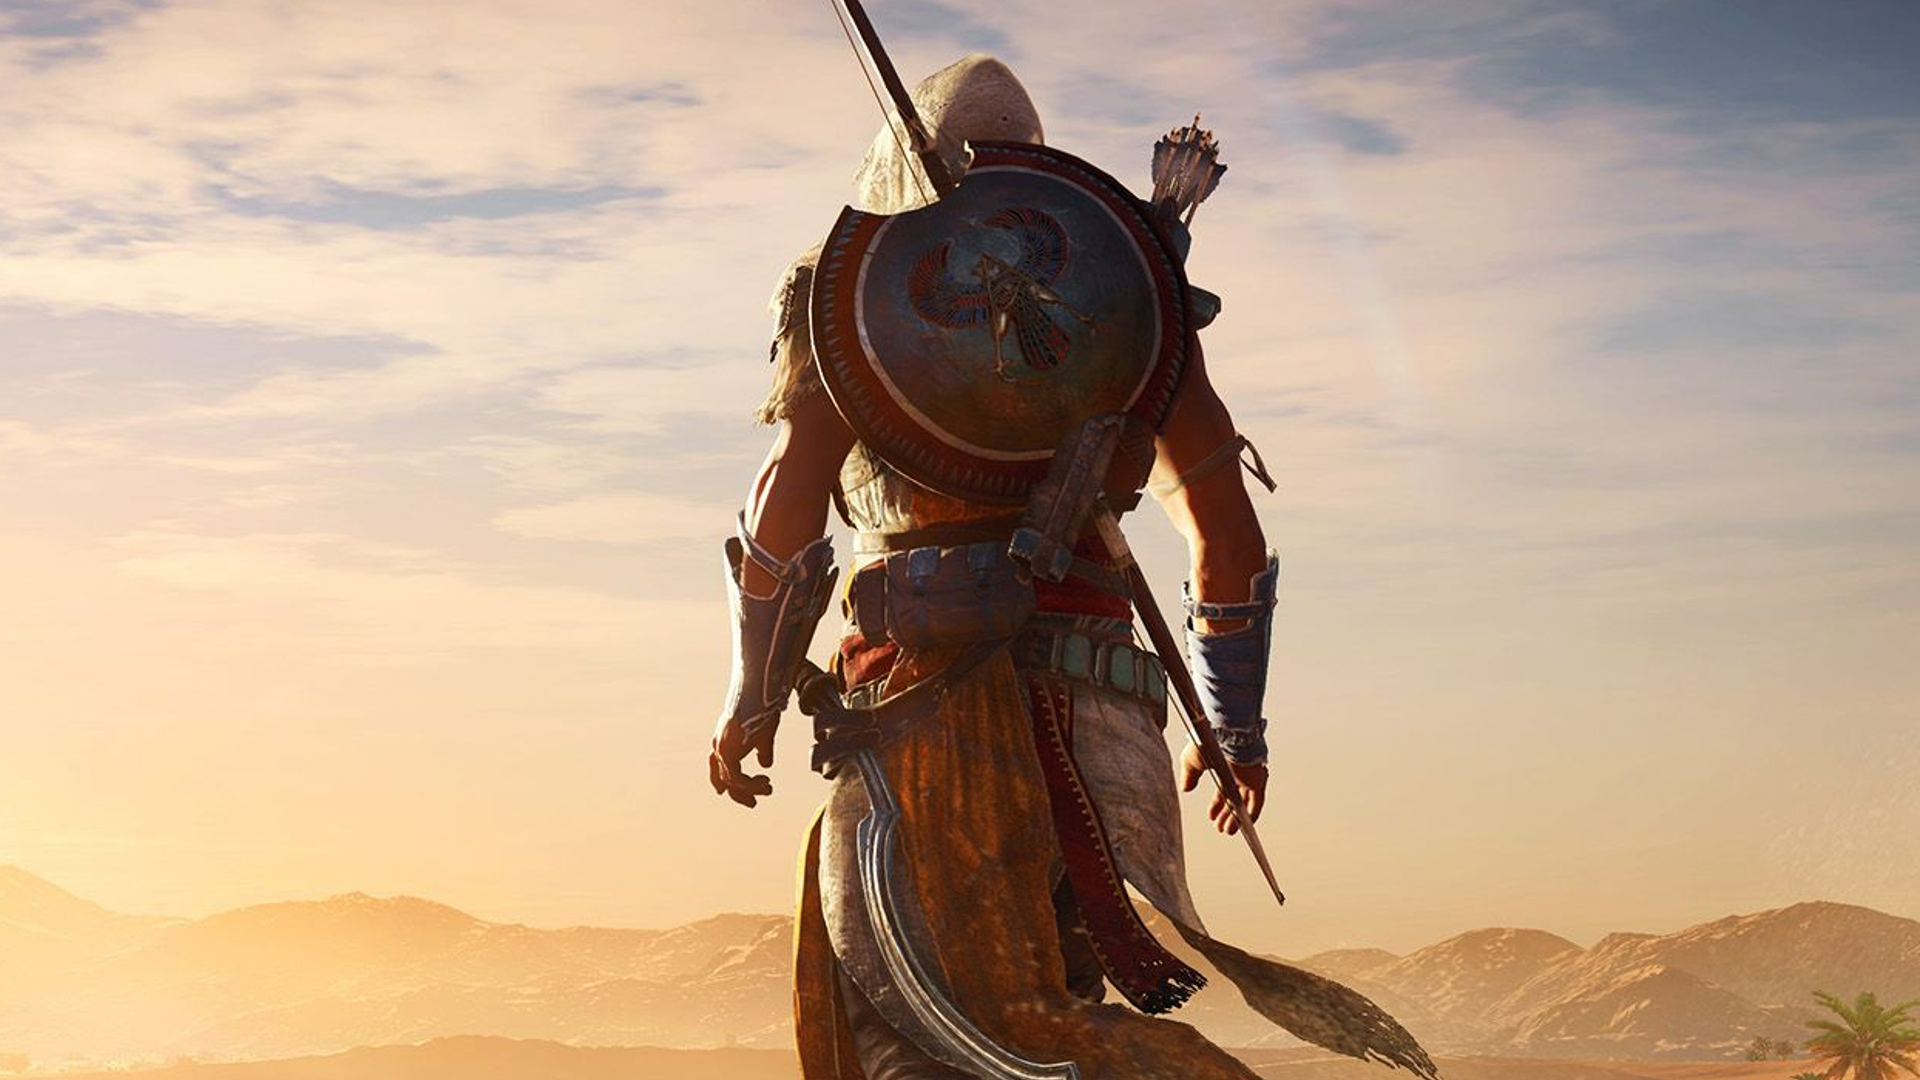 Assassin's Creed Valhalla' Review: A Fun but Uneasy Conquest